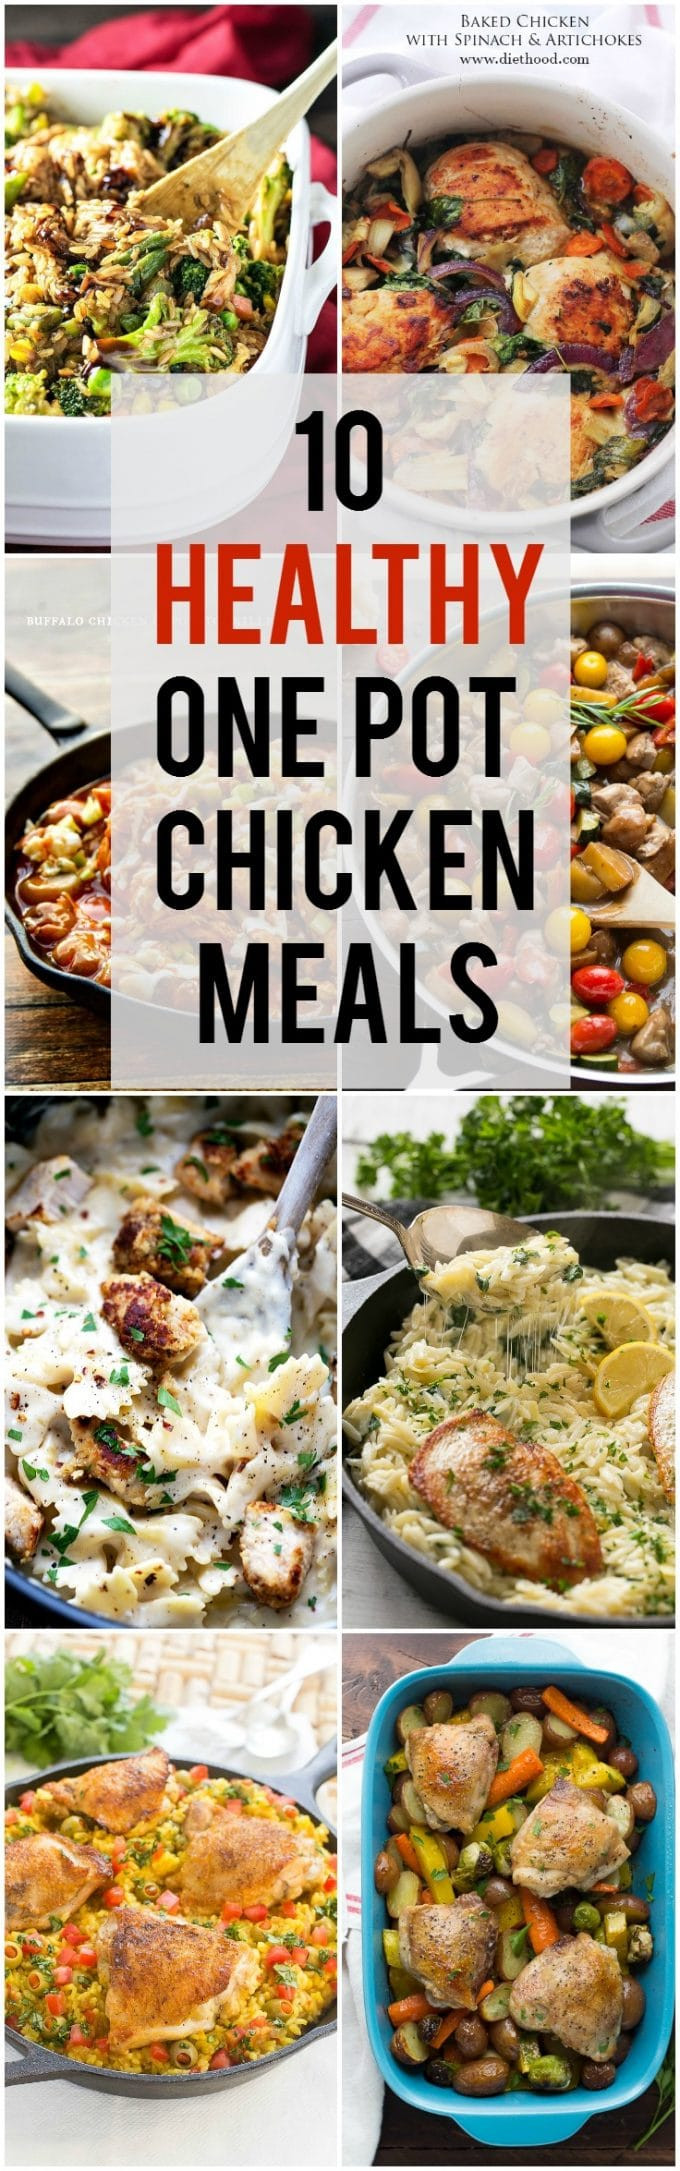 Healthy One Pot Dinners
 10 Healthy e Pot Meals with Chicken Dinner at the Zoo